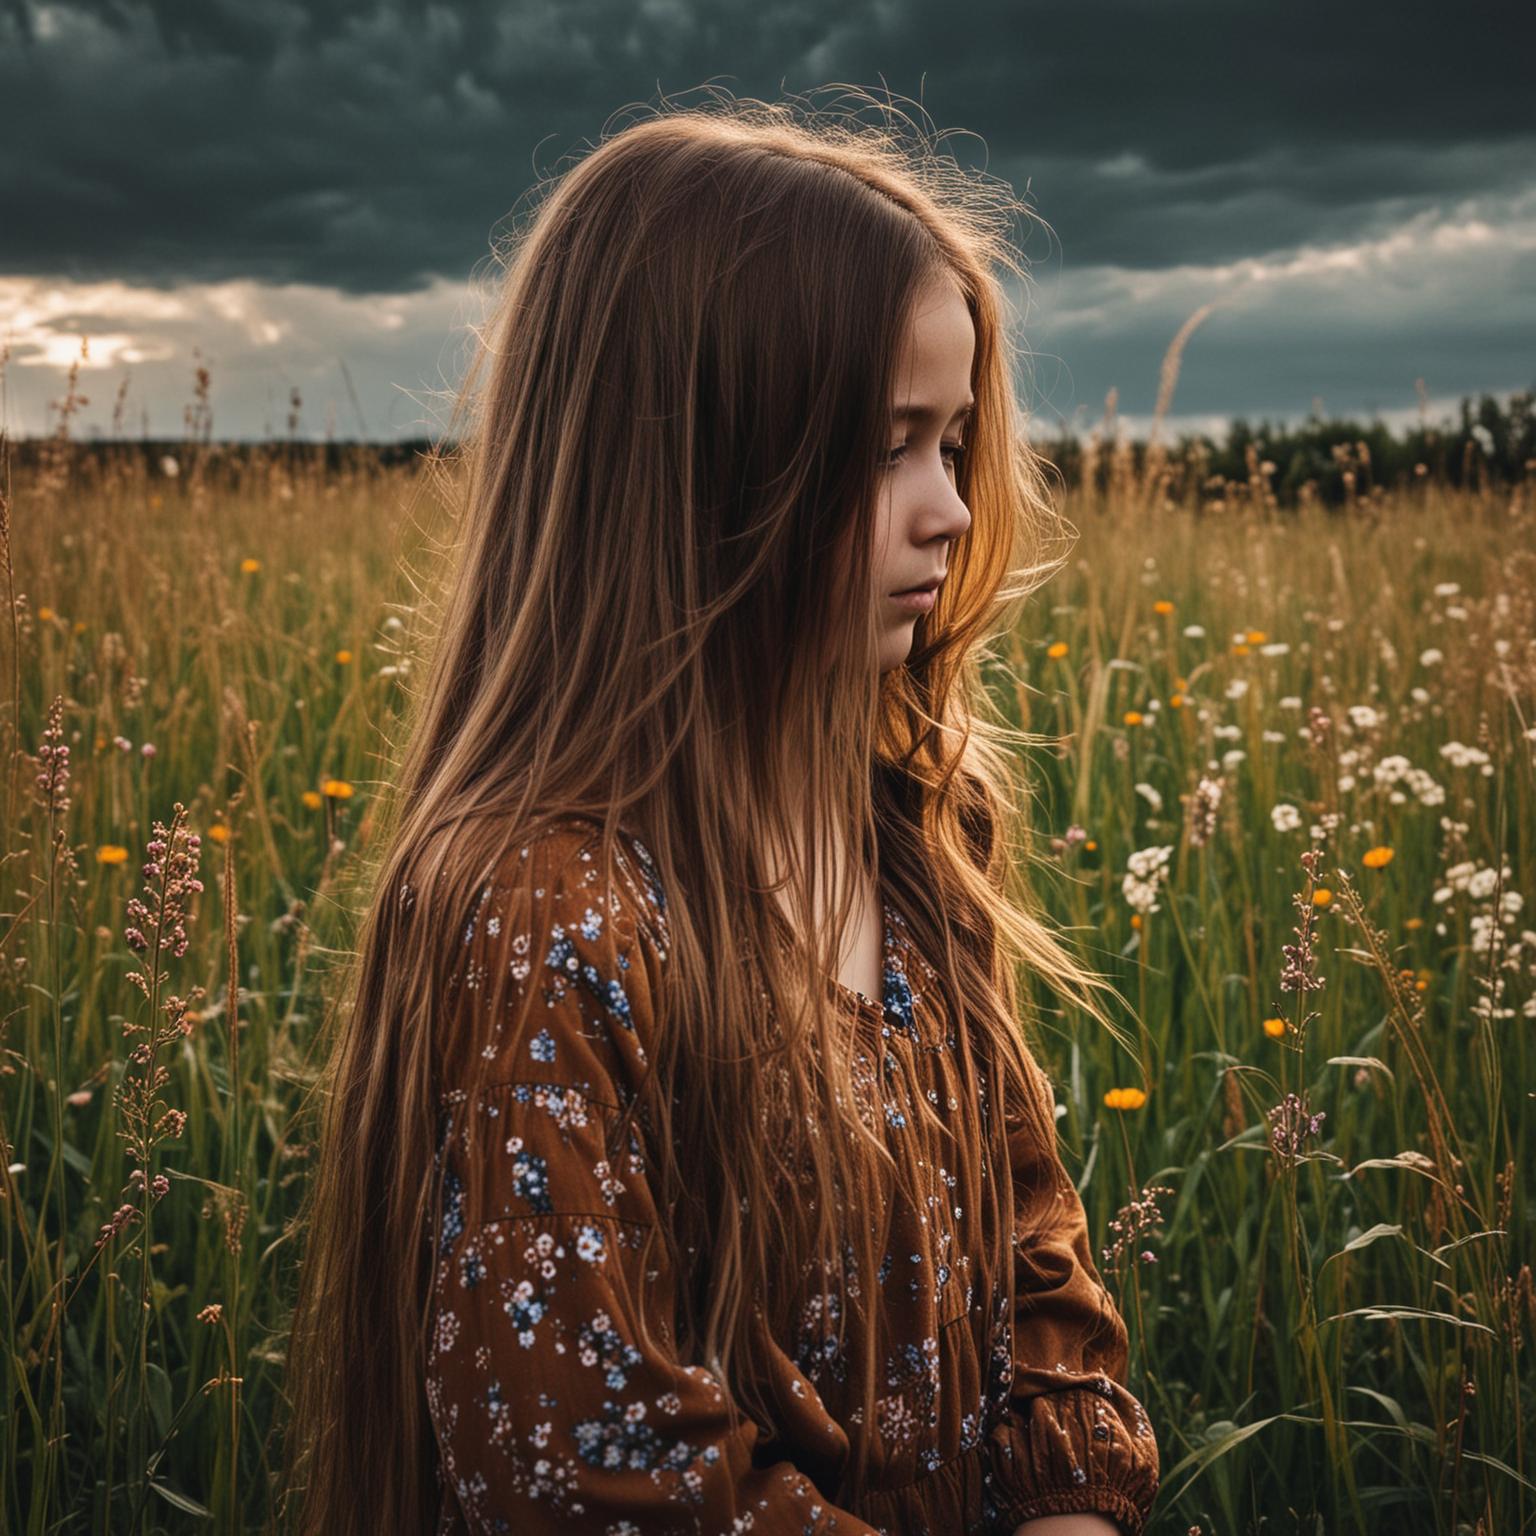 child sad backlight long hair back high grass colors flowers stormy clouds 